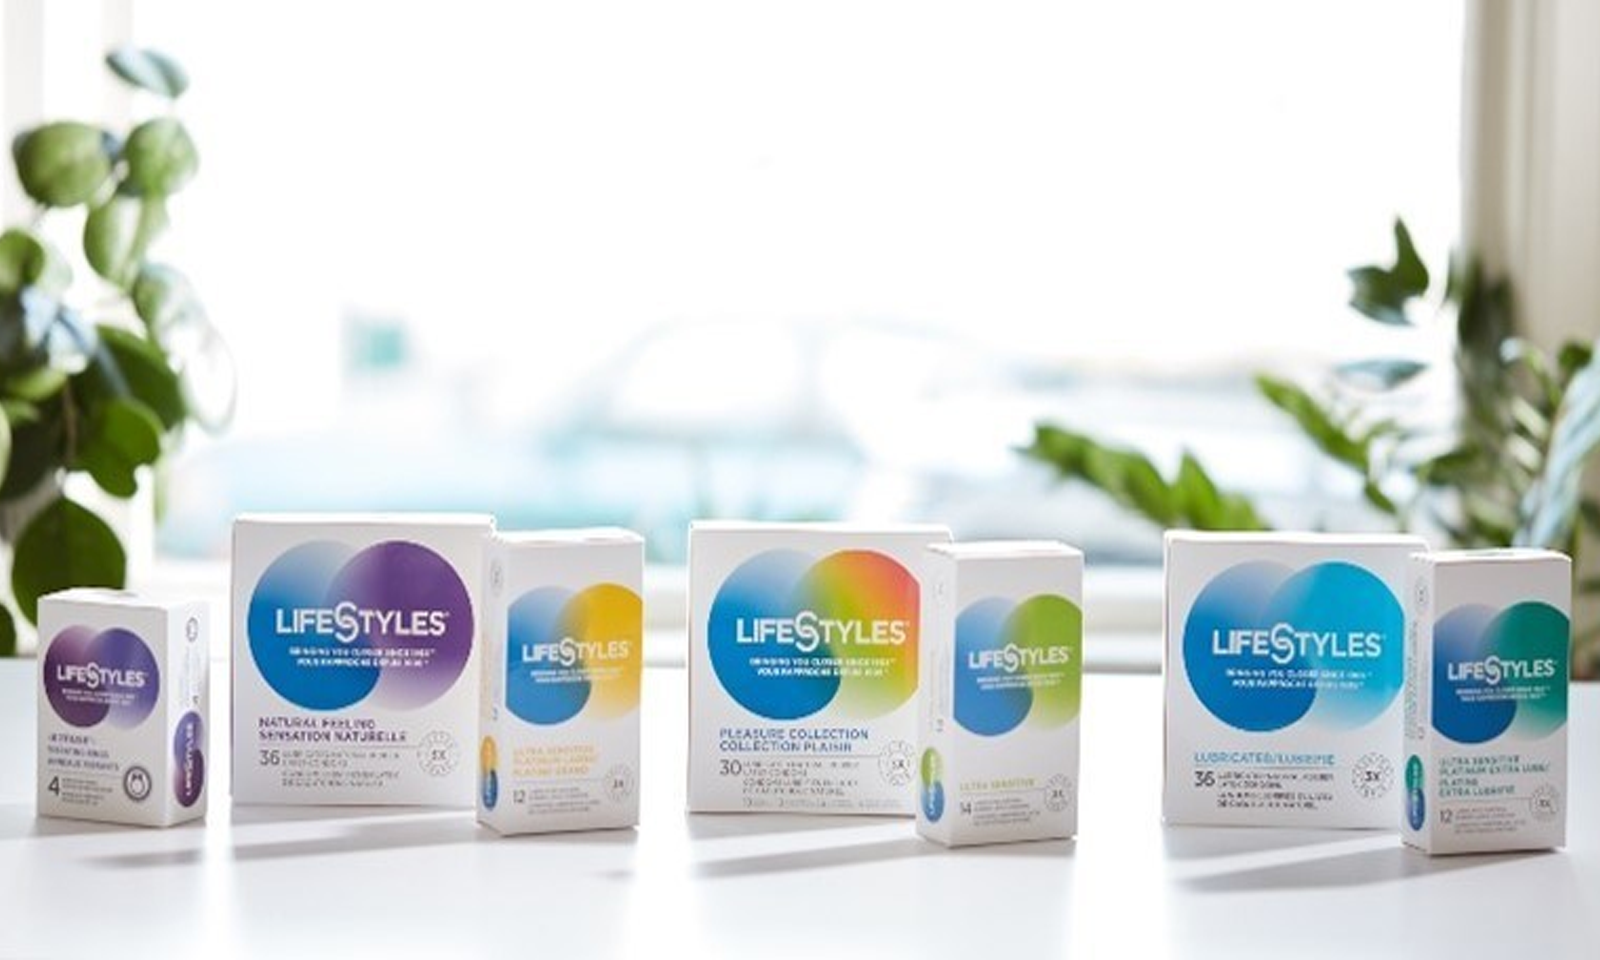 LifeStyles Announces New Product Packaging Design